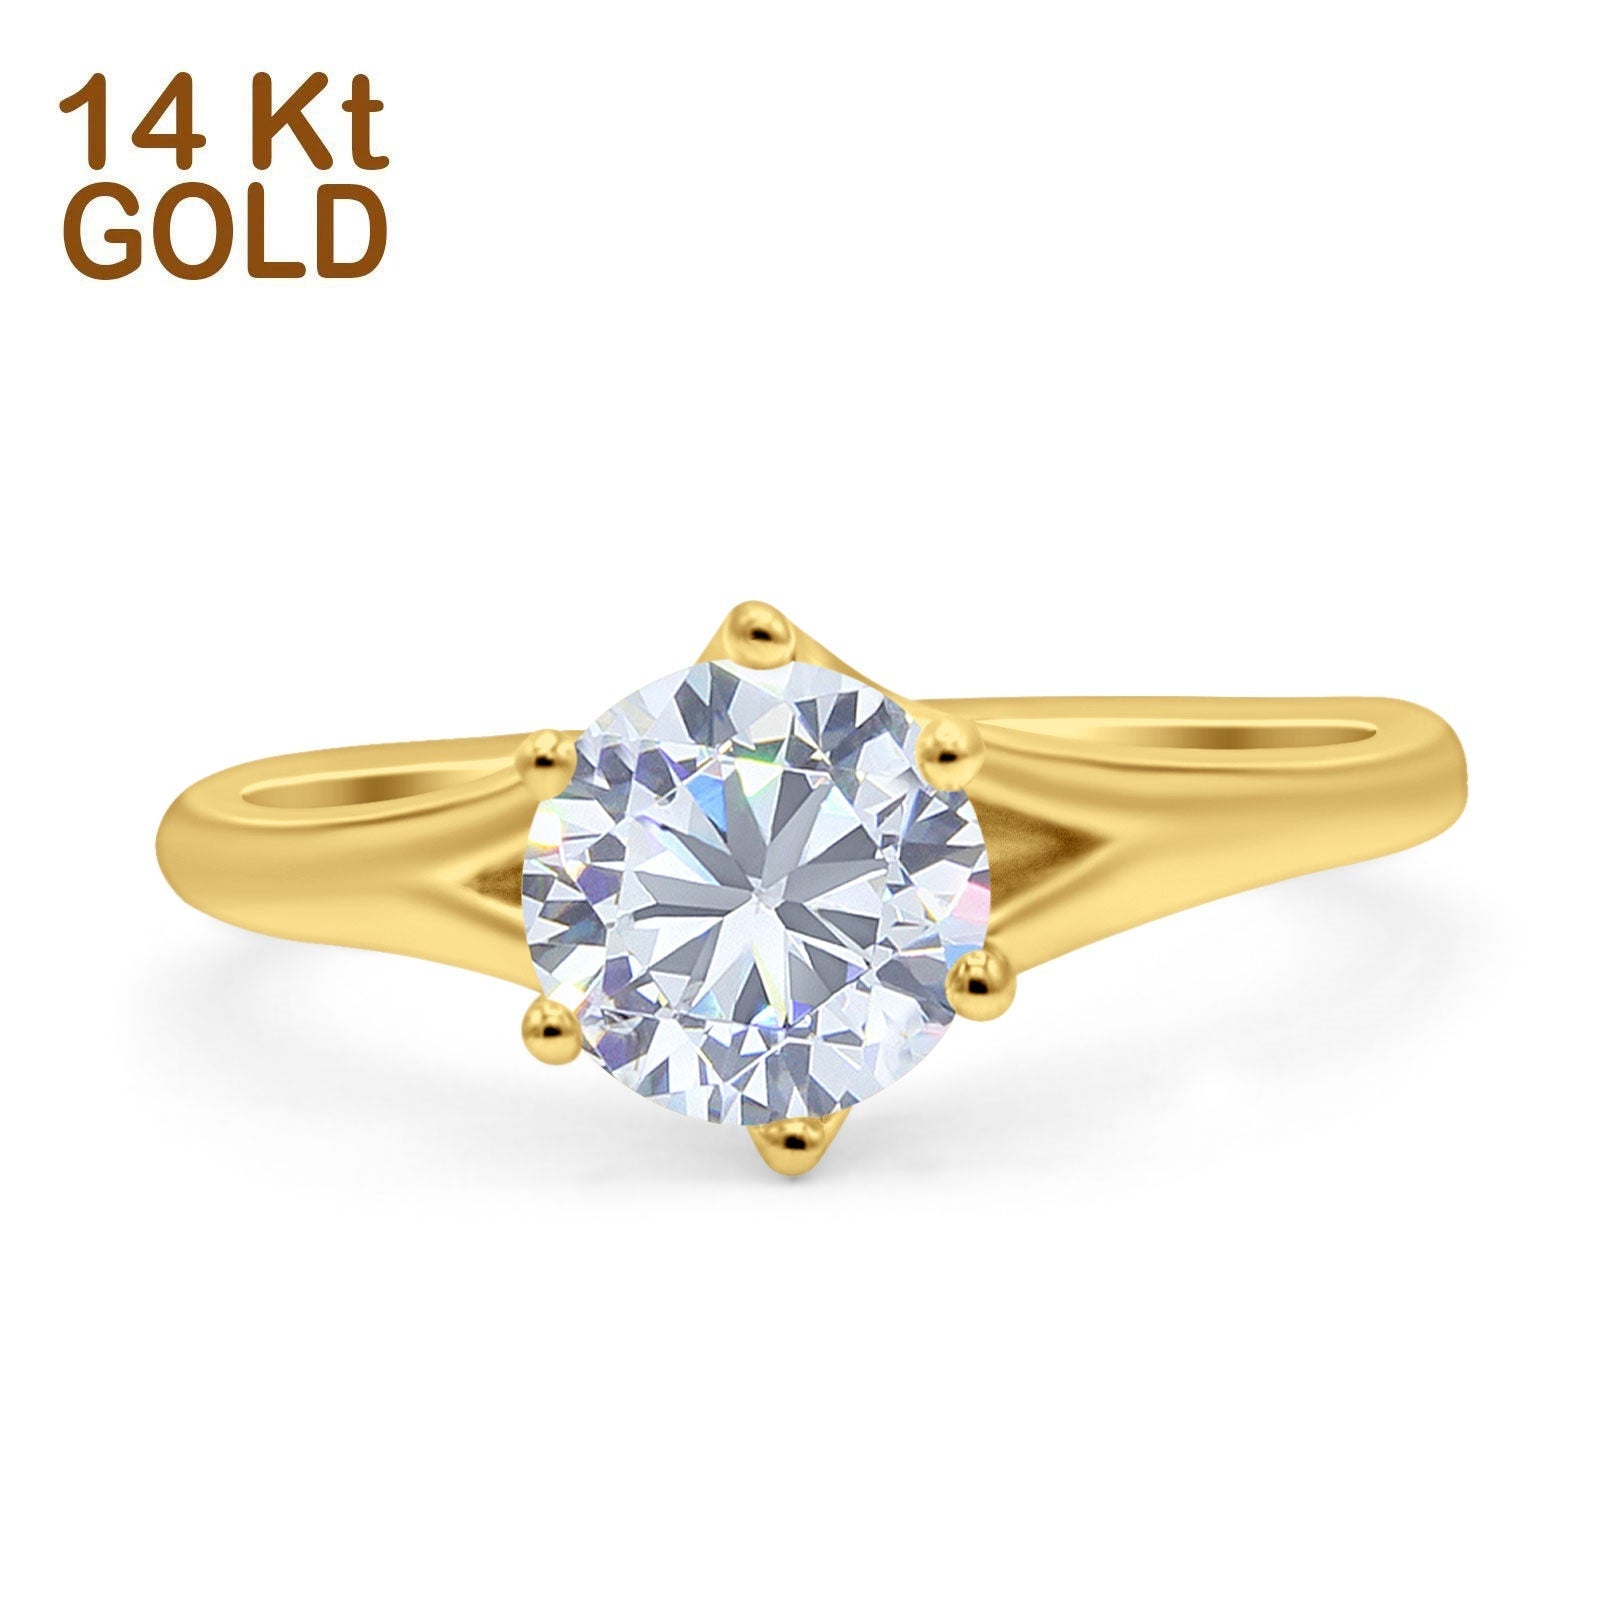 14K Gold Vintage Solitaire Round Shape Simulated Cubic Zirconia Wedding Engagement Ring